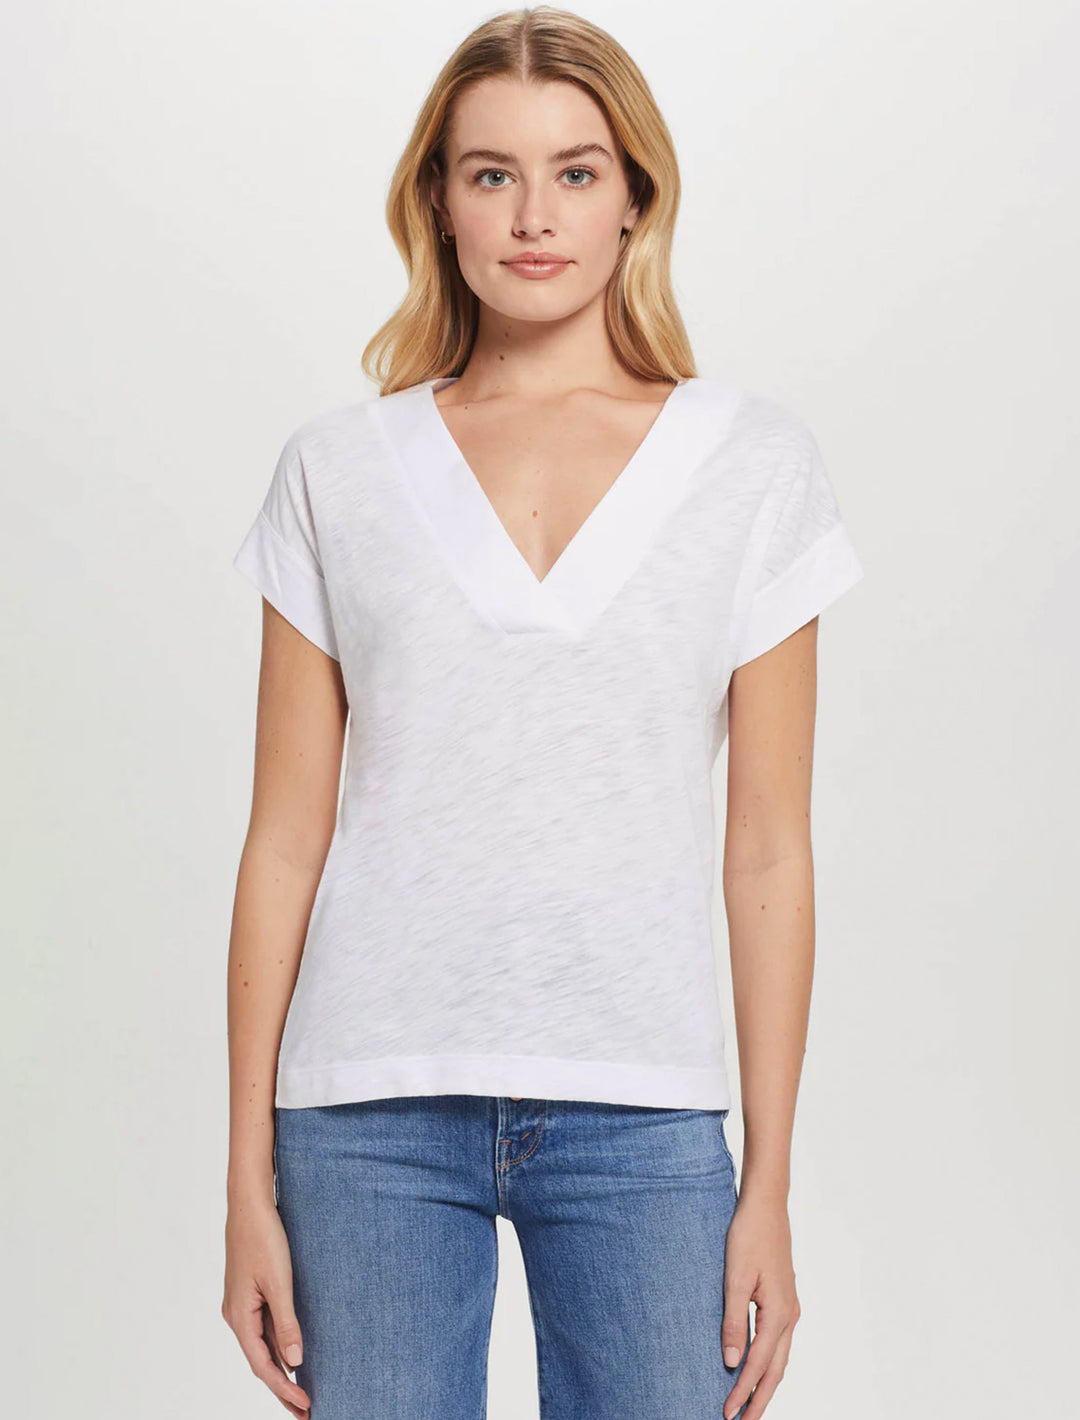 Model wearing Goldie Lewinter's mariana basic v neck in white.